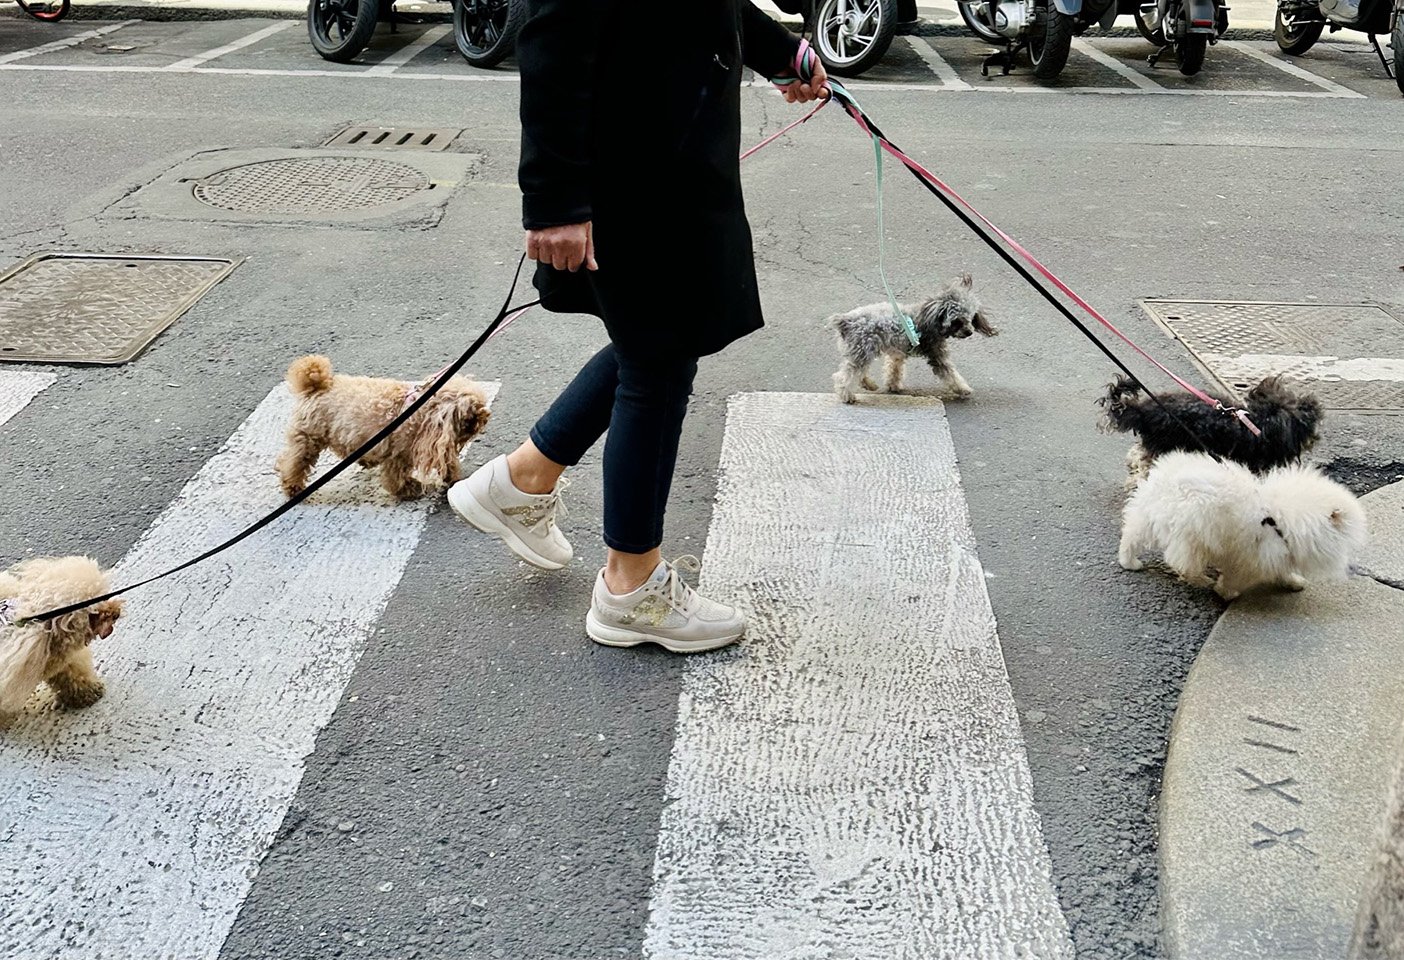 Dogs on show, the many faces of Milano. Photo c/o Space.